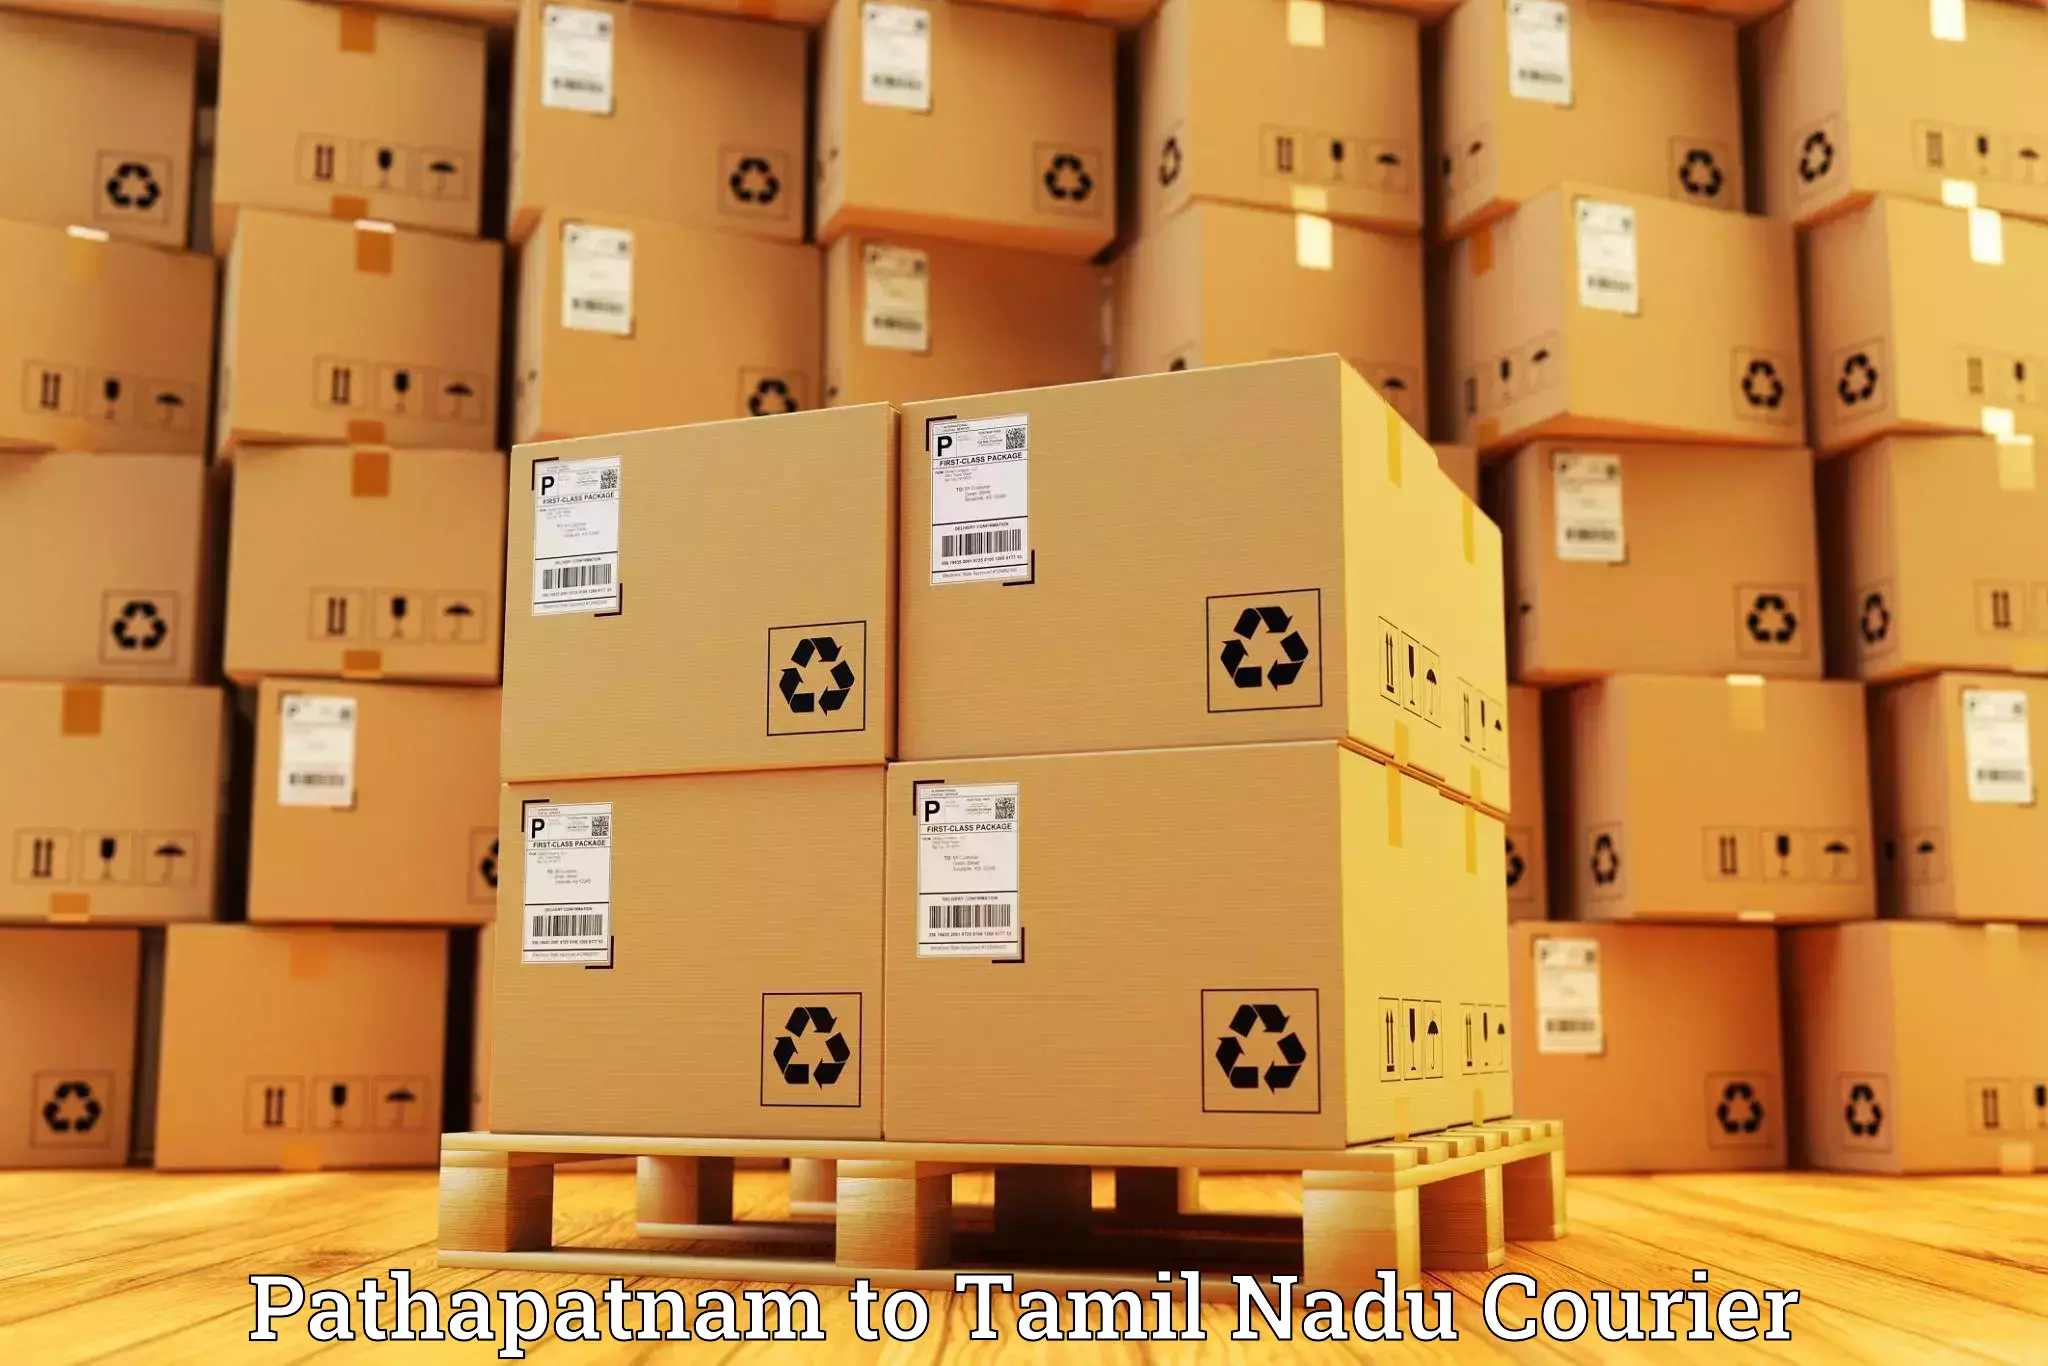 Courier service innovation Pathapatnam to Ennore Port Chennai